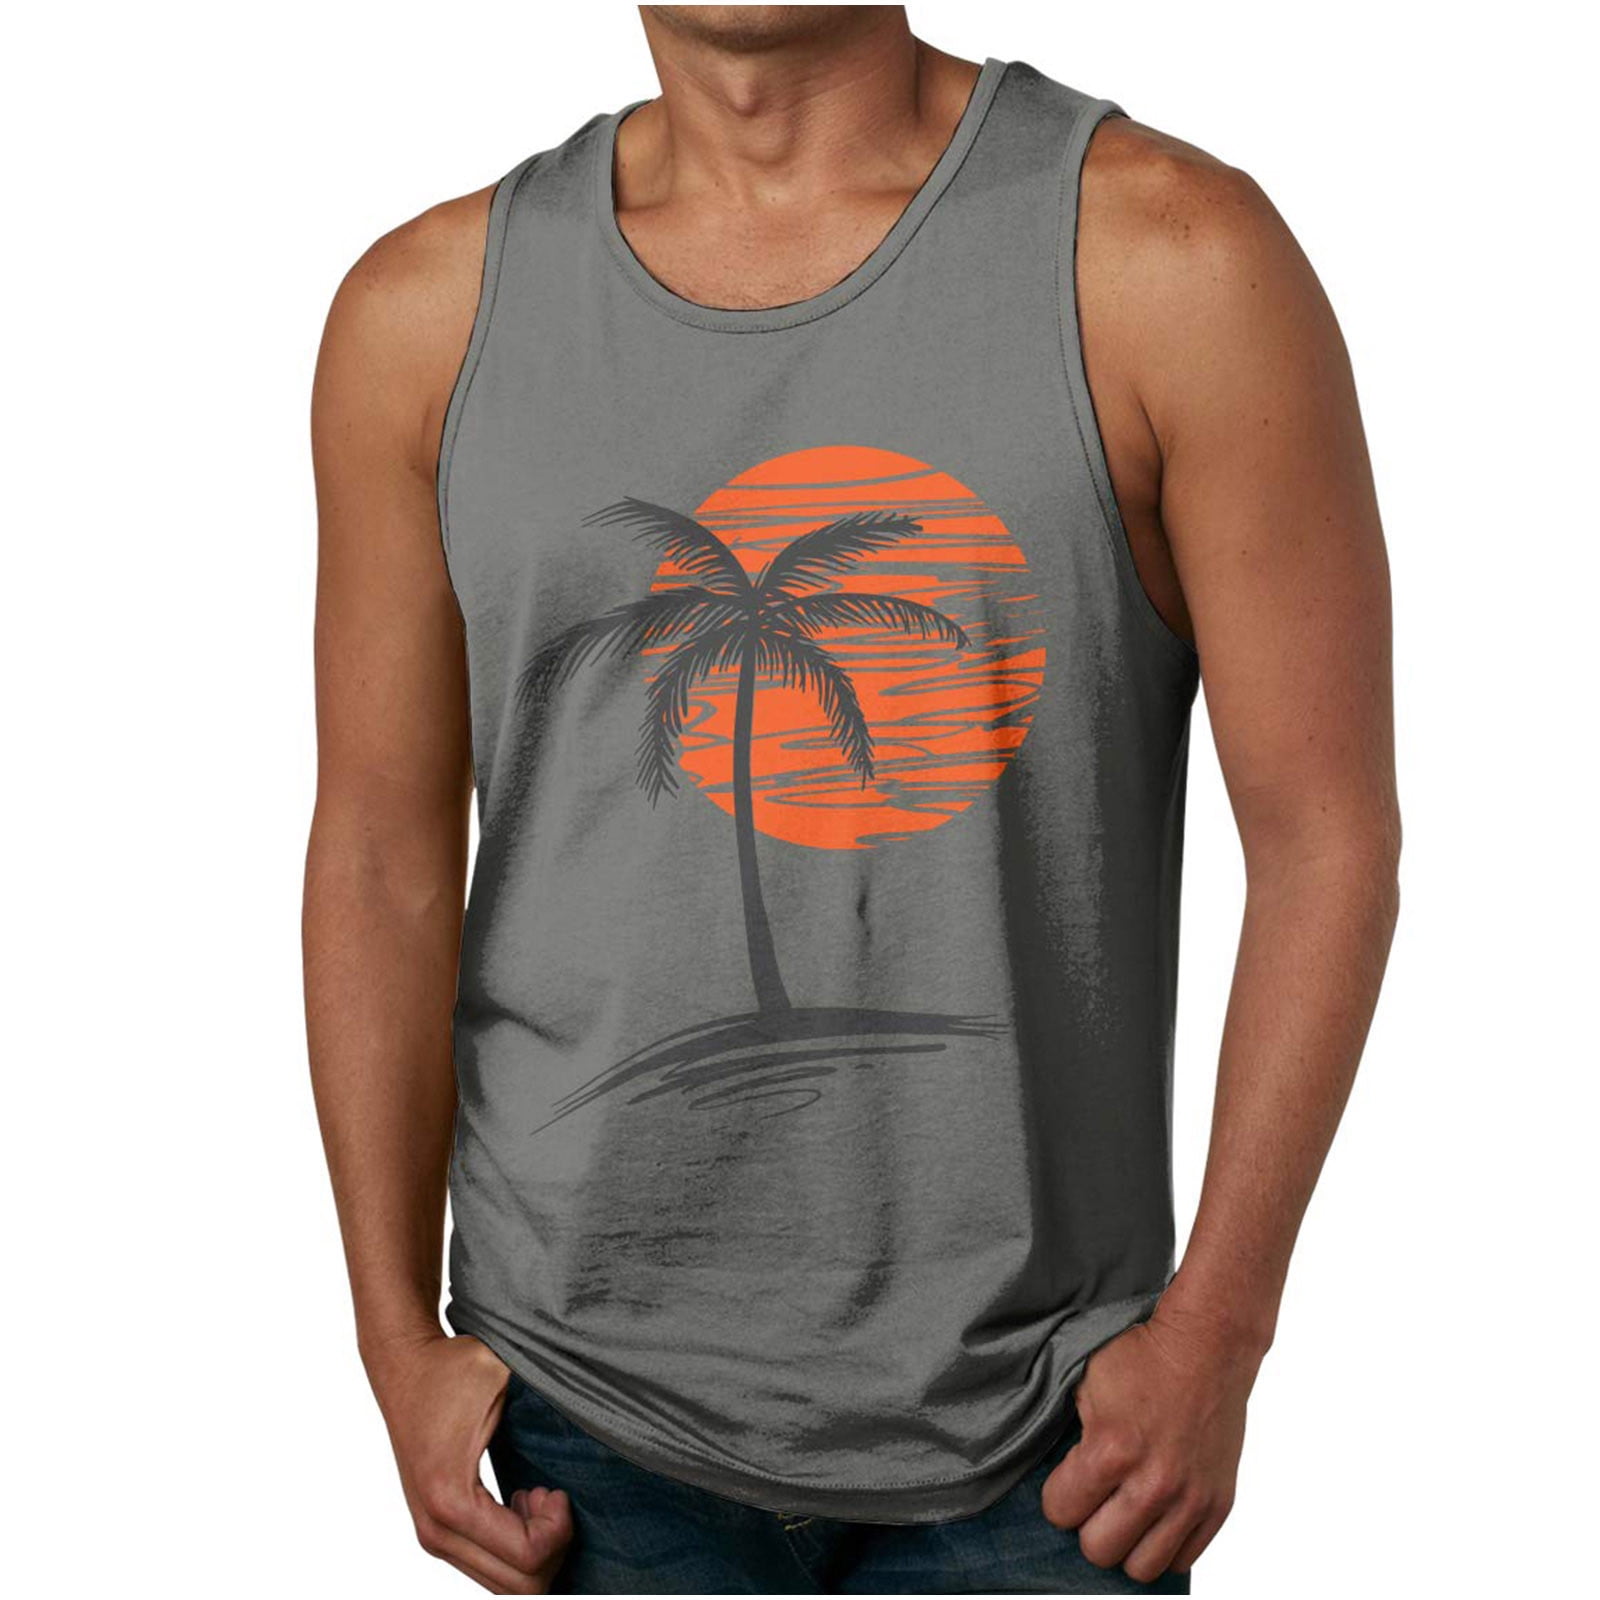 NaRHbrg Palm Tree Tanks Tops for Mens Cool Printed Graphic Sleeveless Tank Top Muscle Shirt for Workout Gym Jogging 